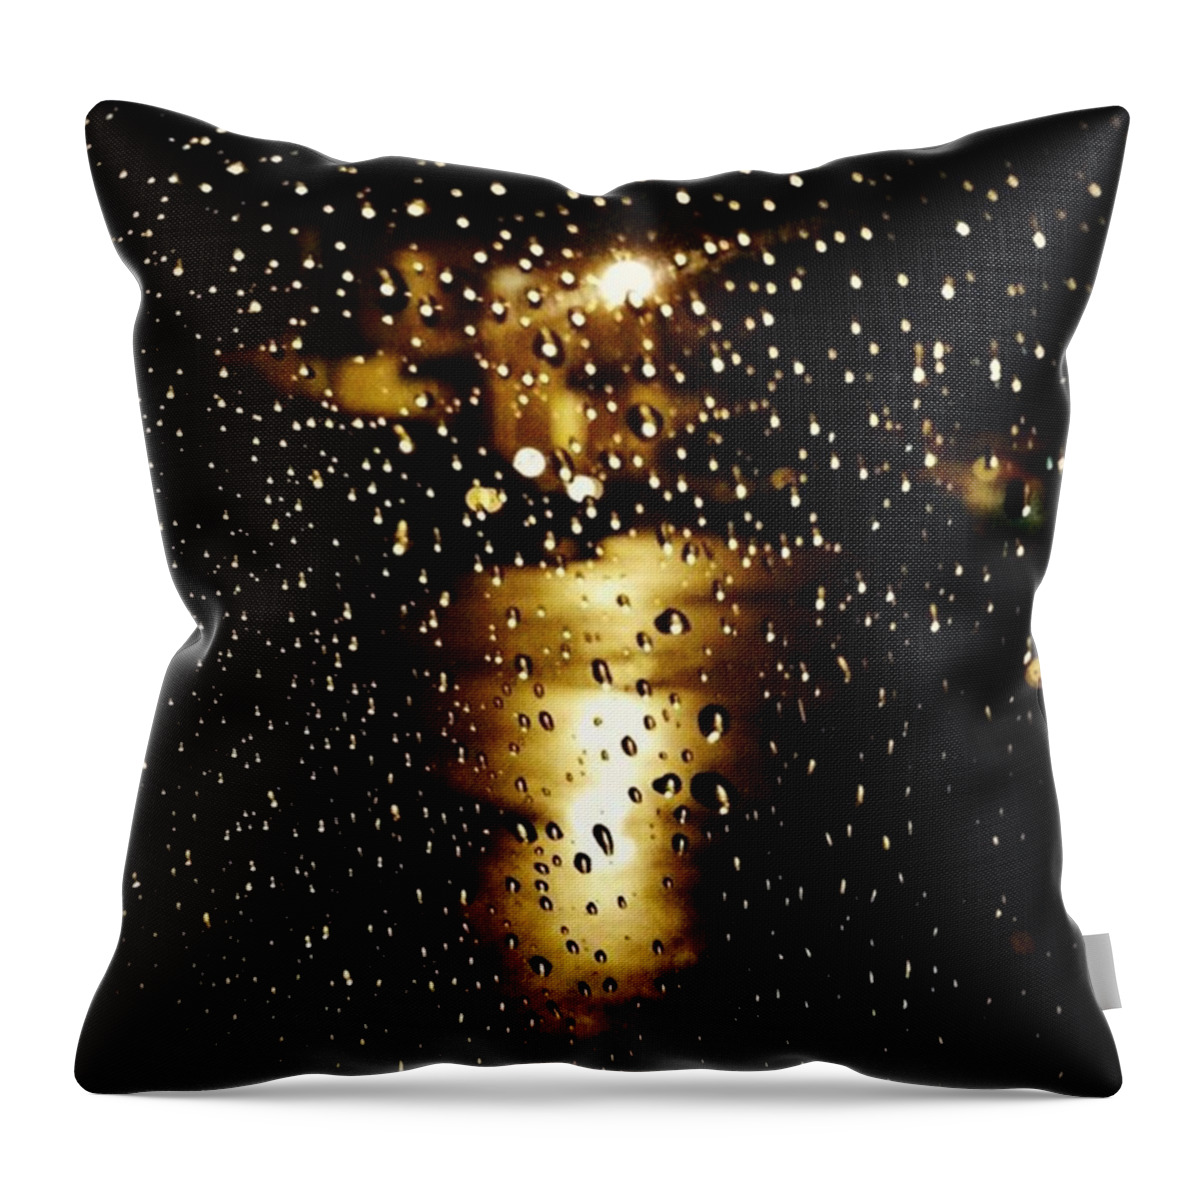  Throw Pillow featuring the photograph Raindrops On A Car Window by Casey Dozier